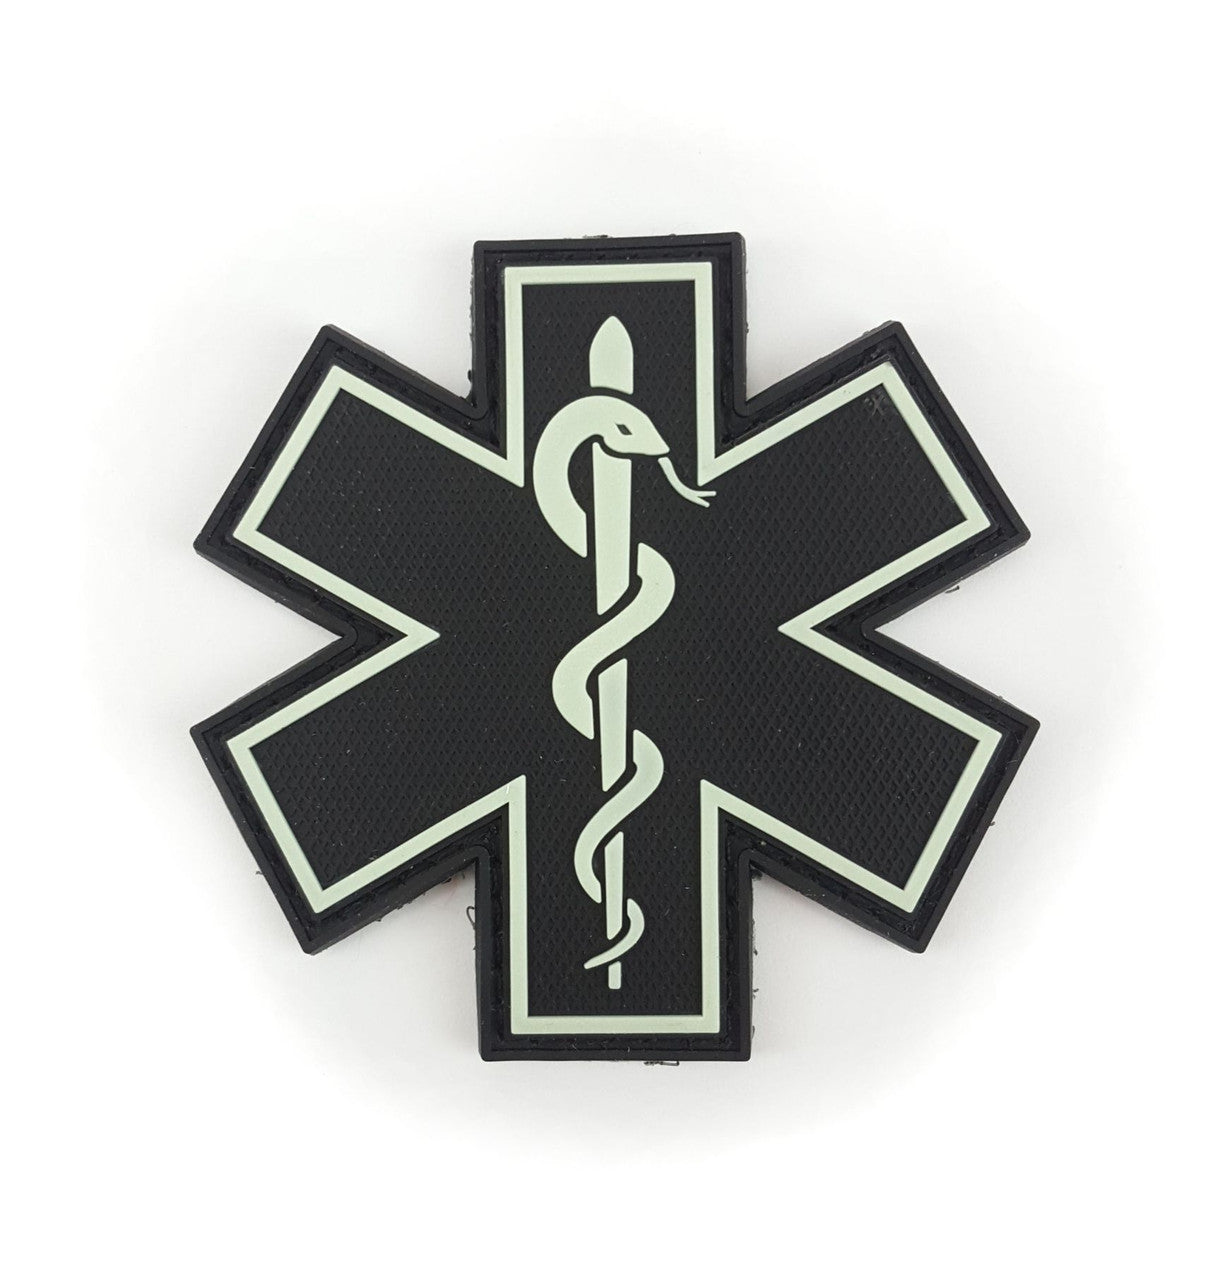 TIC Patch - MEDICAL RESPONDER  STAR OF LIFE SINGLE SNAKE - GLOW IN THE DARK